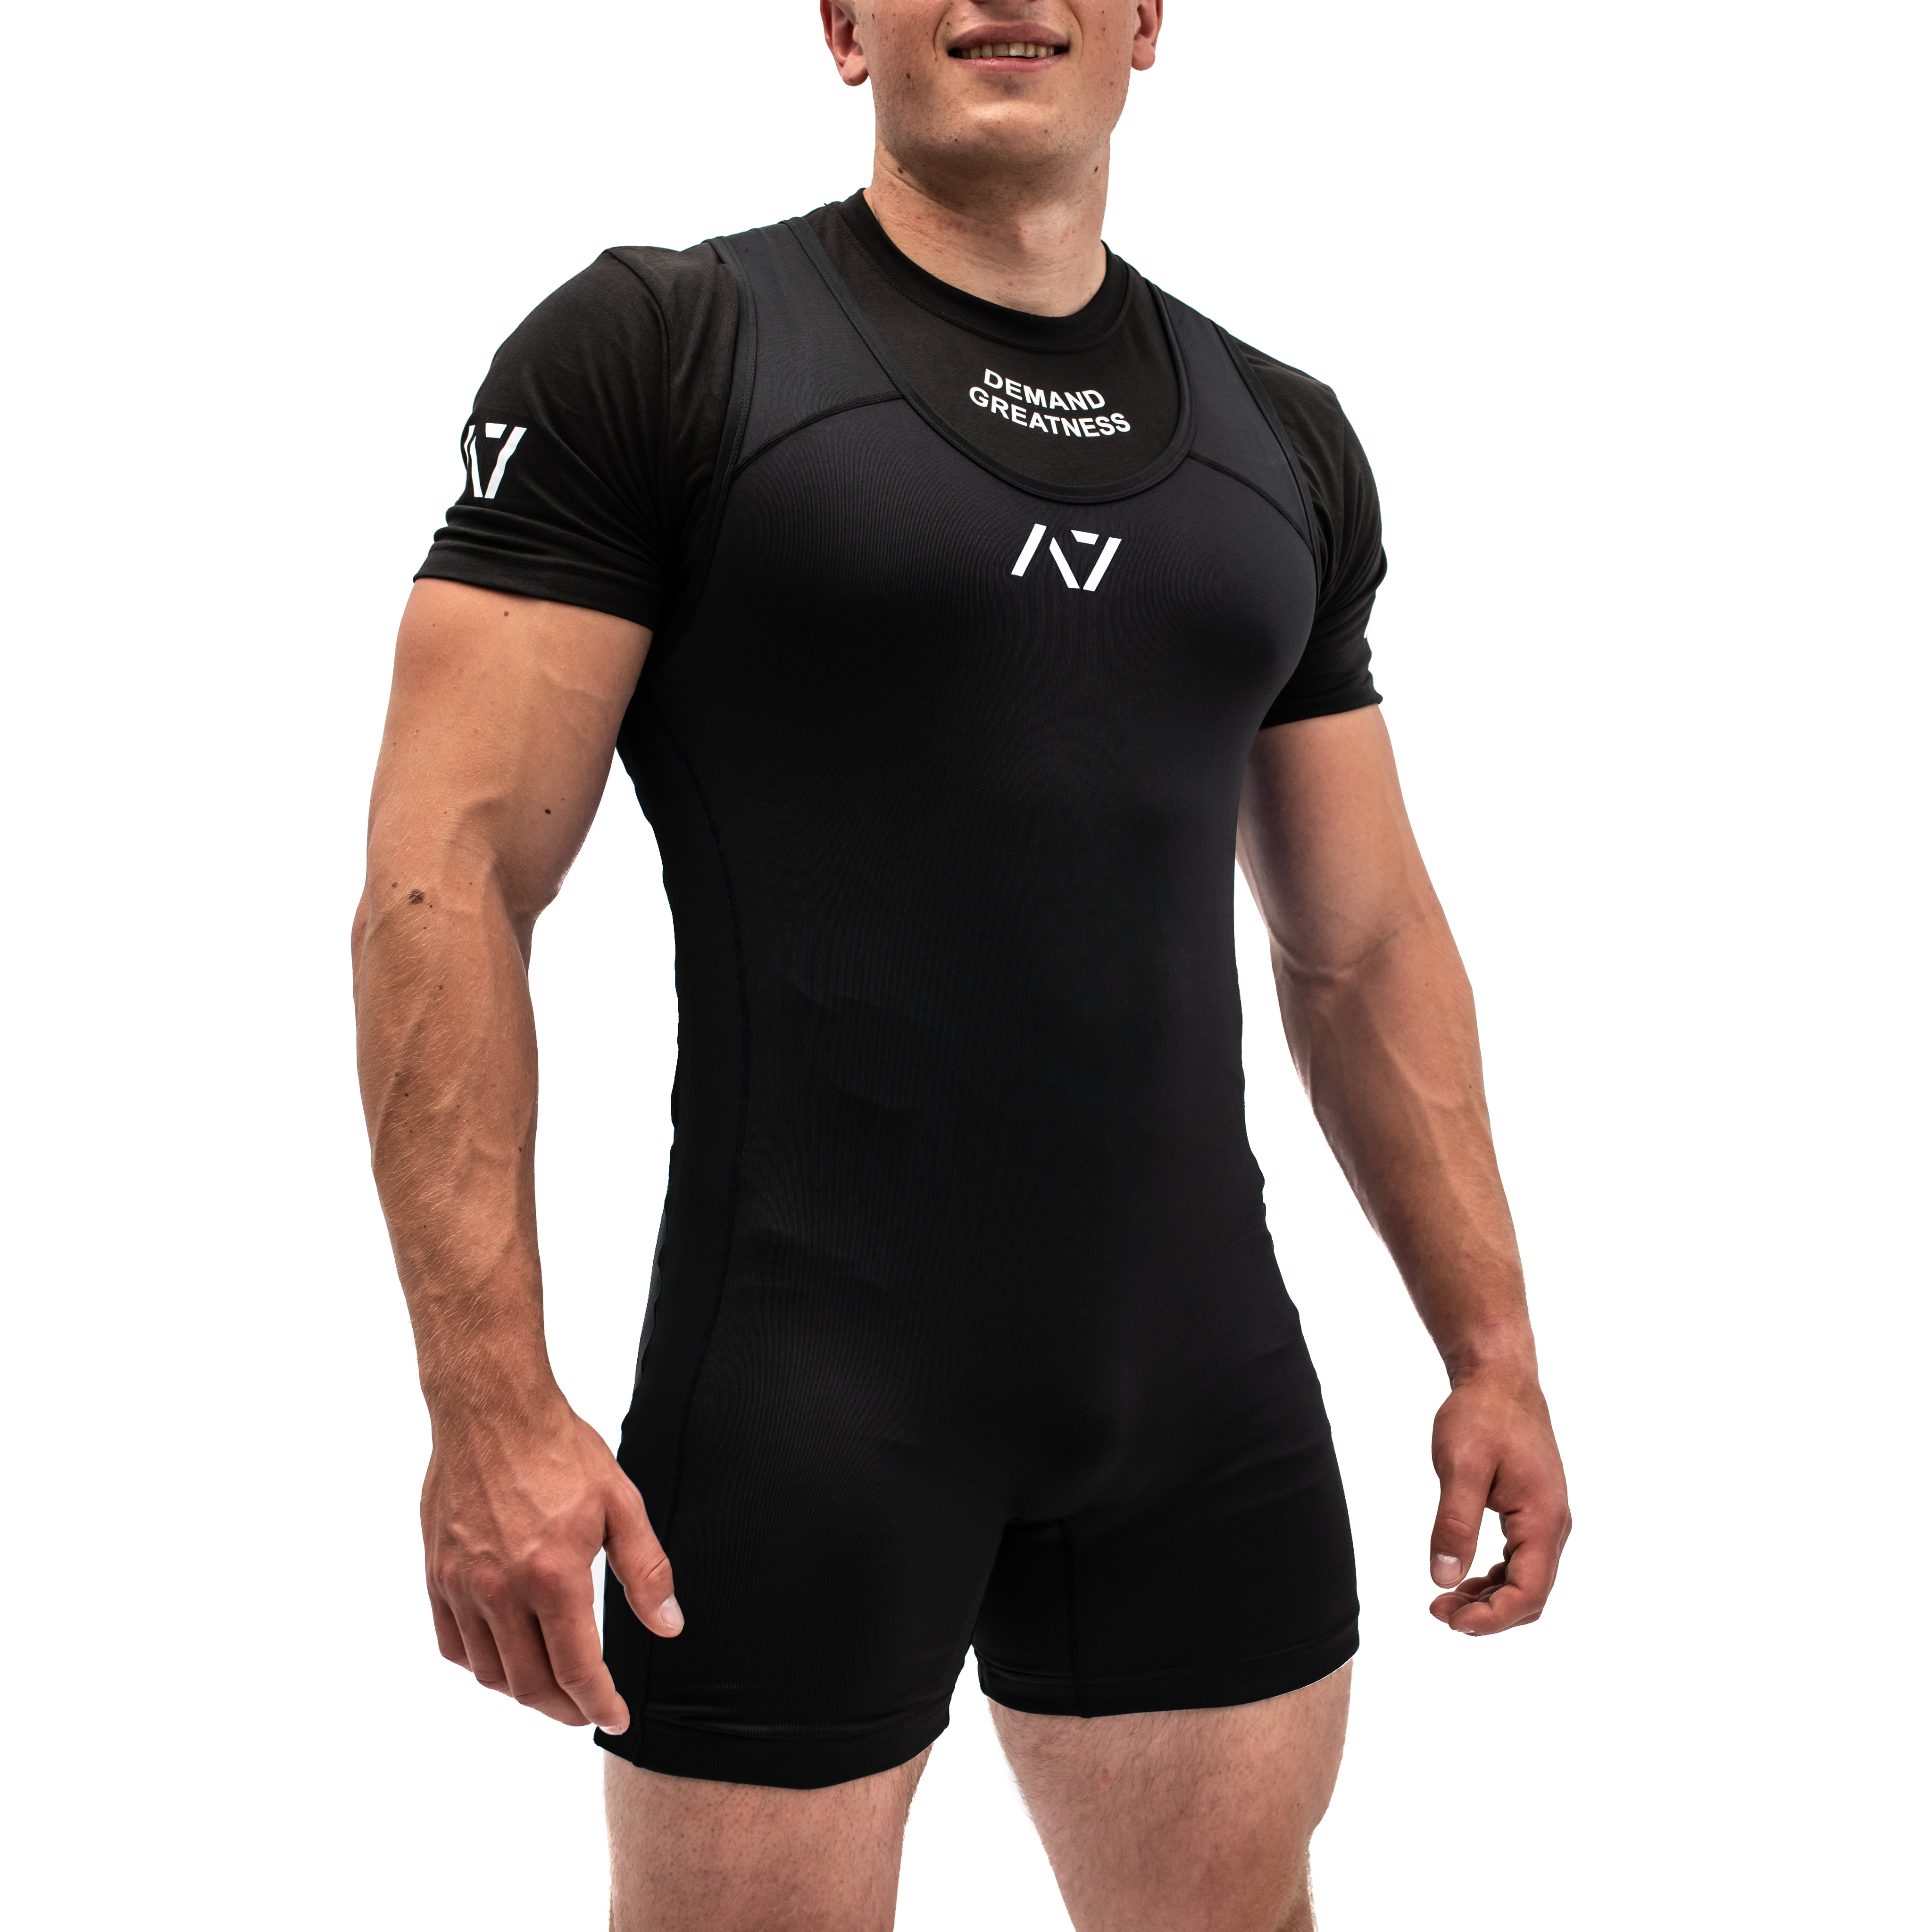 SBD UAE - The SBD singlet features a proprietary fabric developed